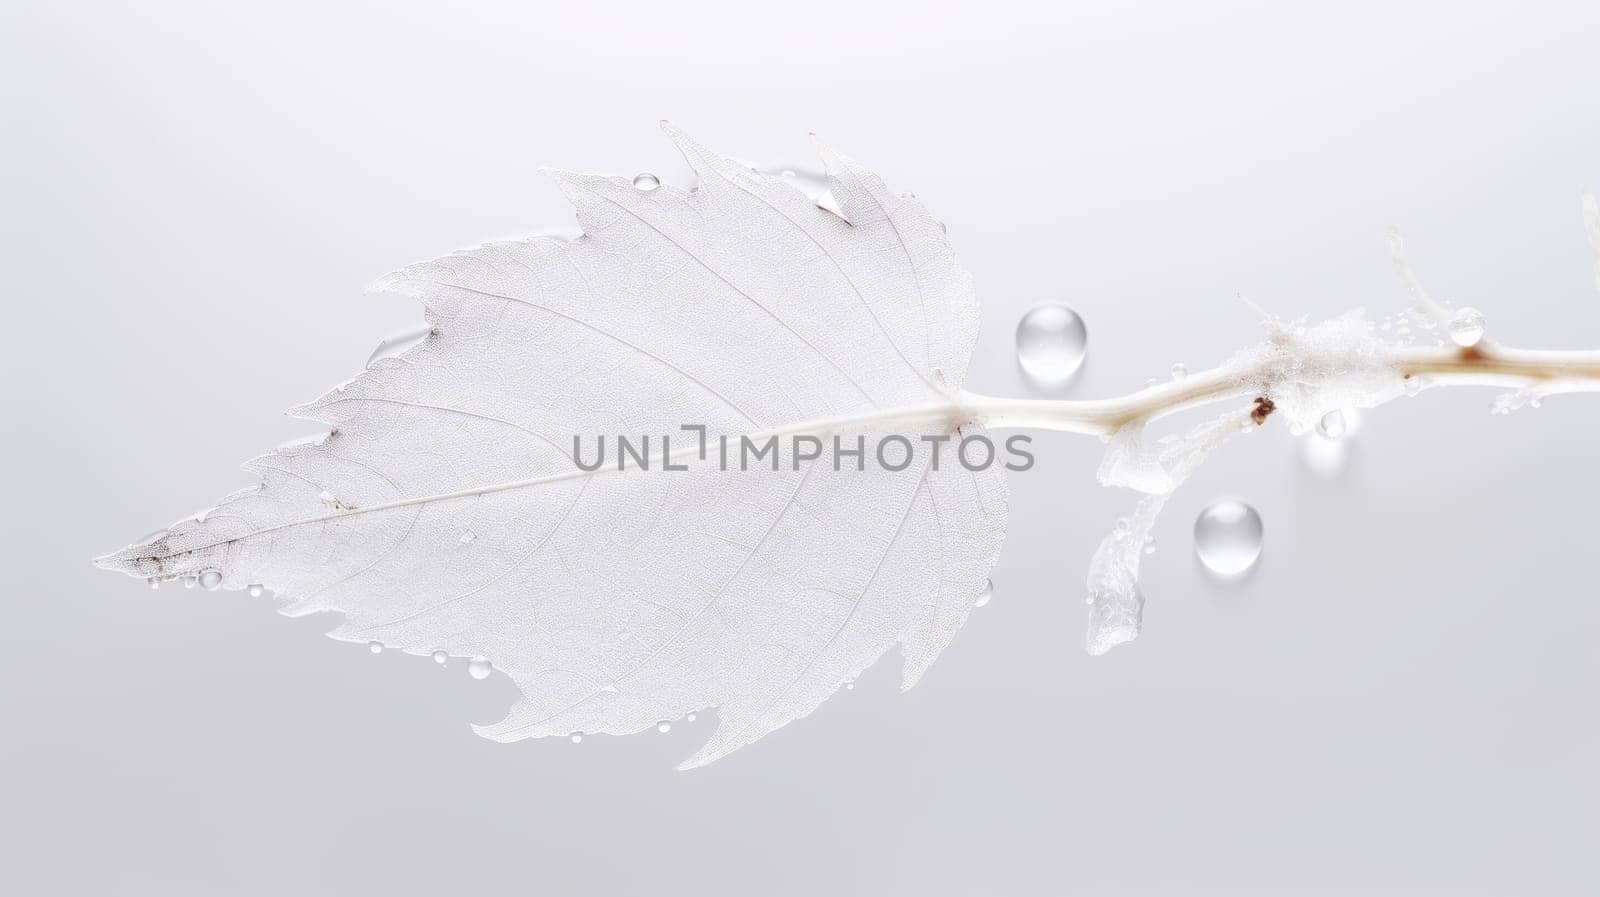 white leaf with water droplets on a white background. This image captures the beauty and fragility of nature. The leaf is translucent and has some red spots, adding contrast and interest. by DogDrawHand